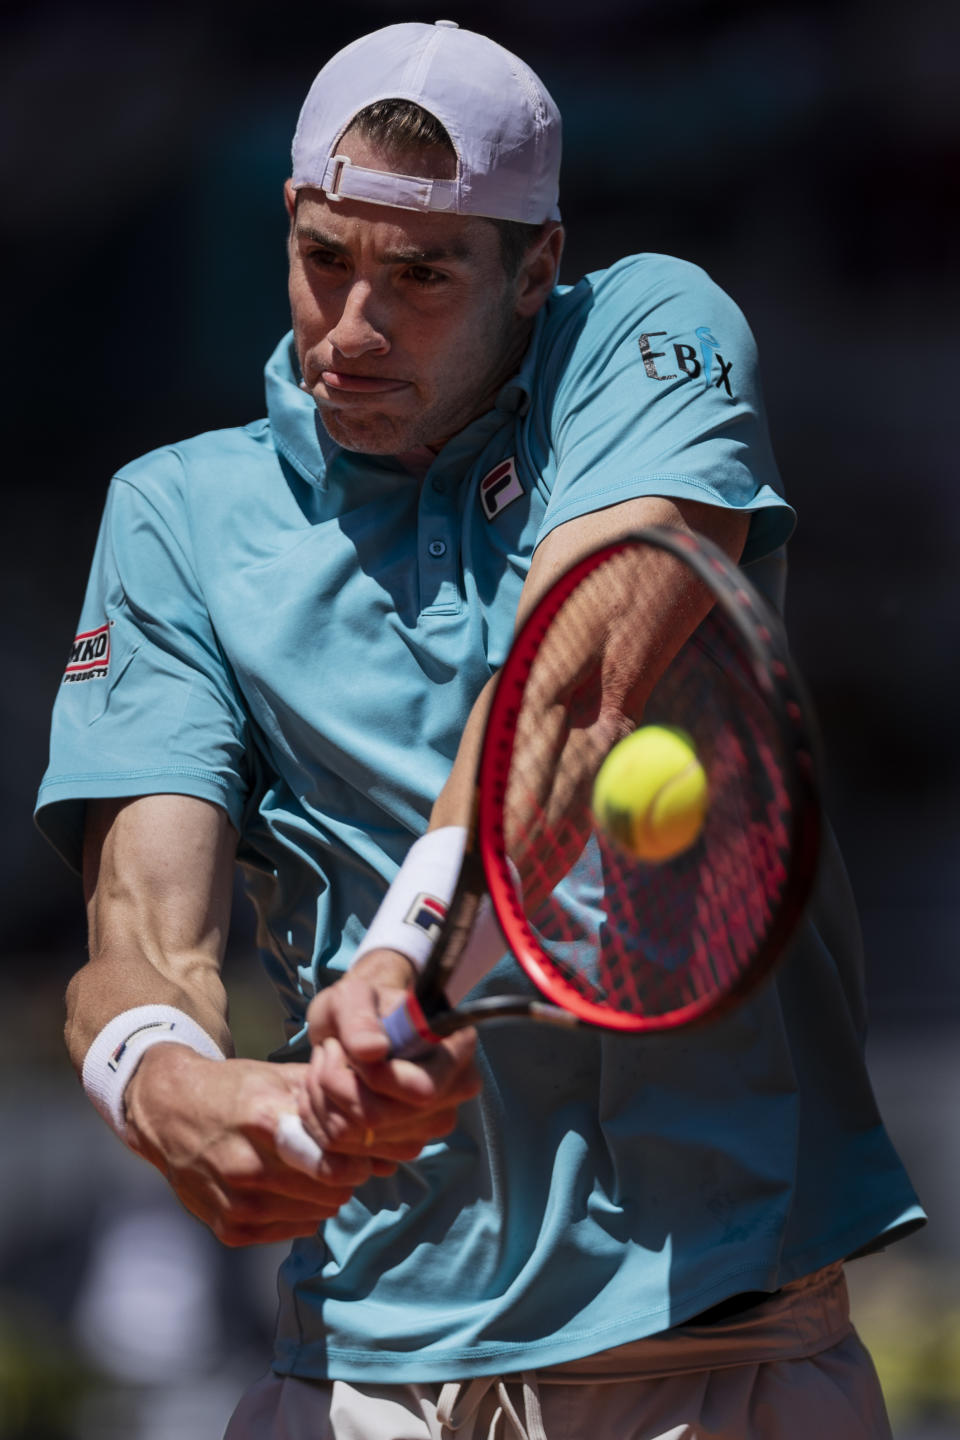 United States' John Isner returns the ball to Austria's Dominic Thiem during their match at the Mutua Madrid Open tennis tournament in Madrid, Spain, Friday, May 7, 2021. (AP Photo/Bernat Armangue)